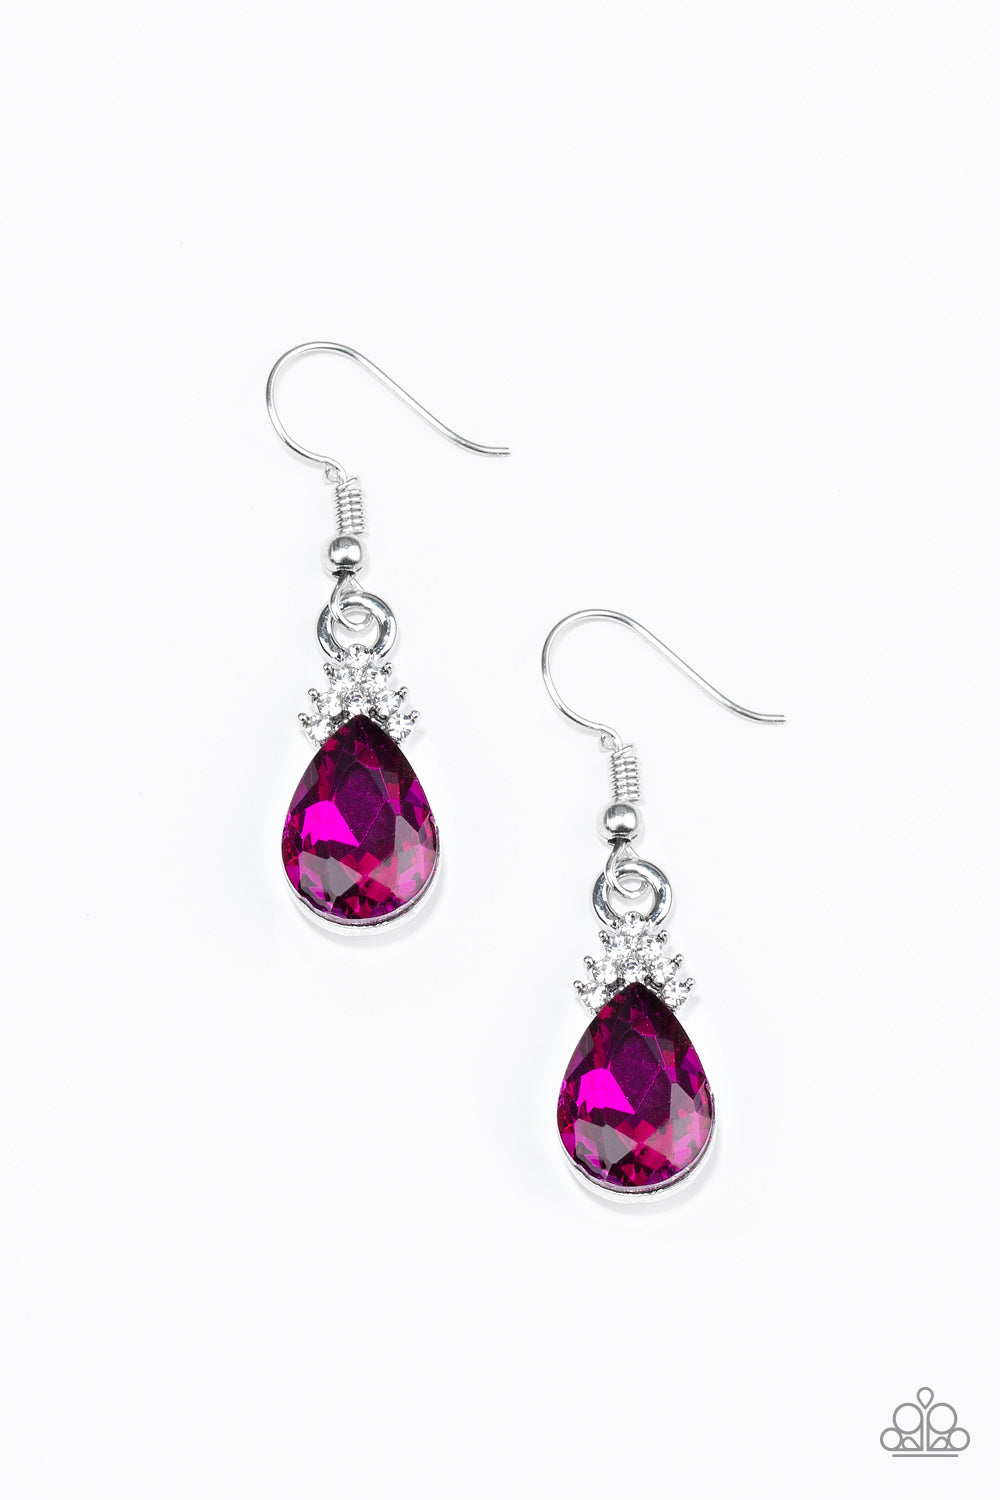 Paparazzi 5th Avenue Fireworks - Pink Earrings - Drop Earrings Paparazzi jewelry images